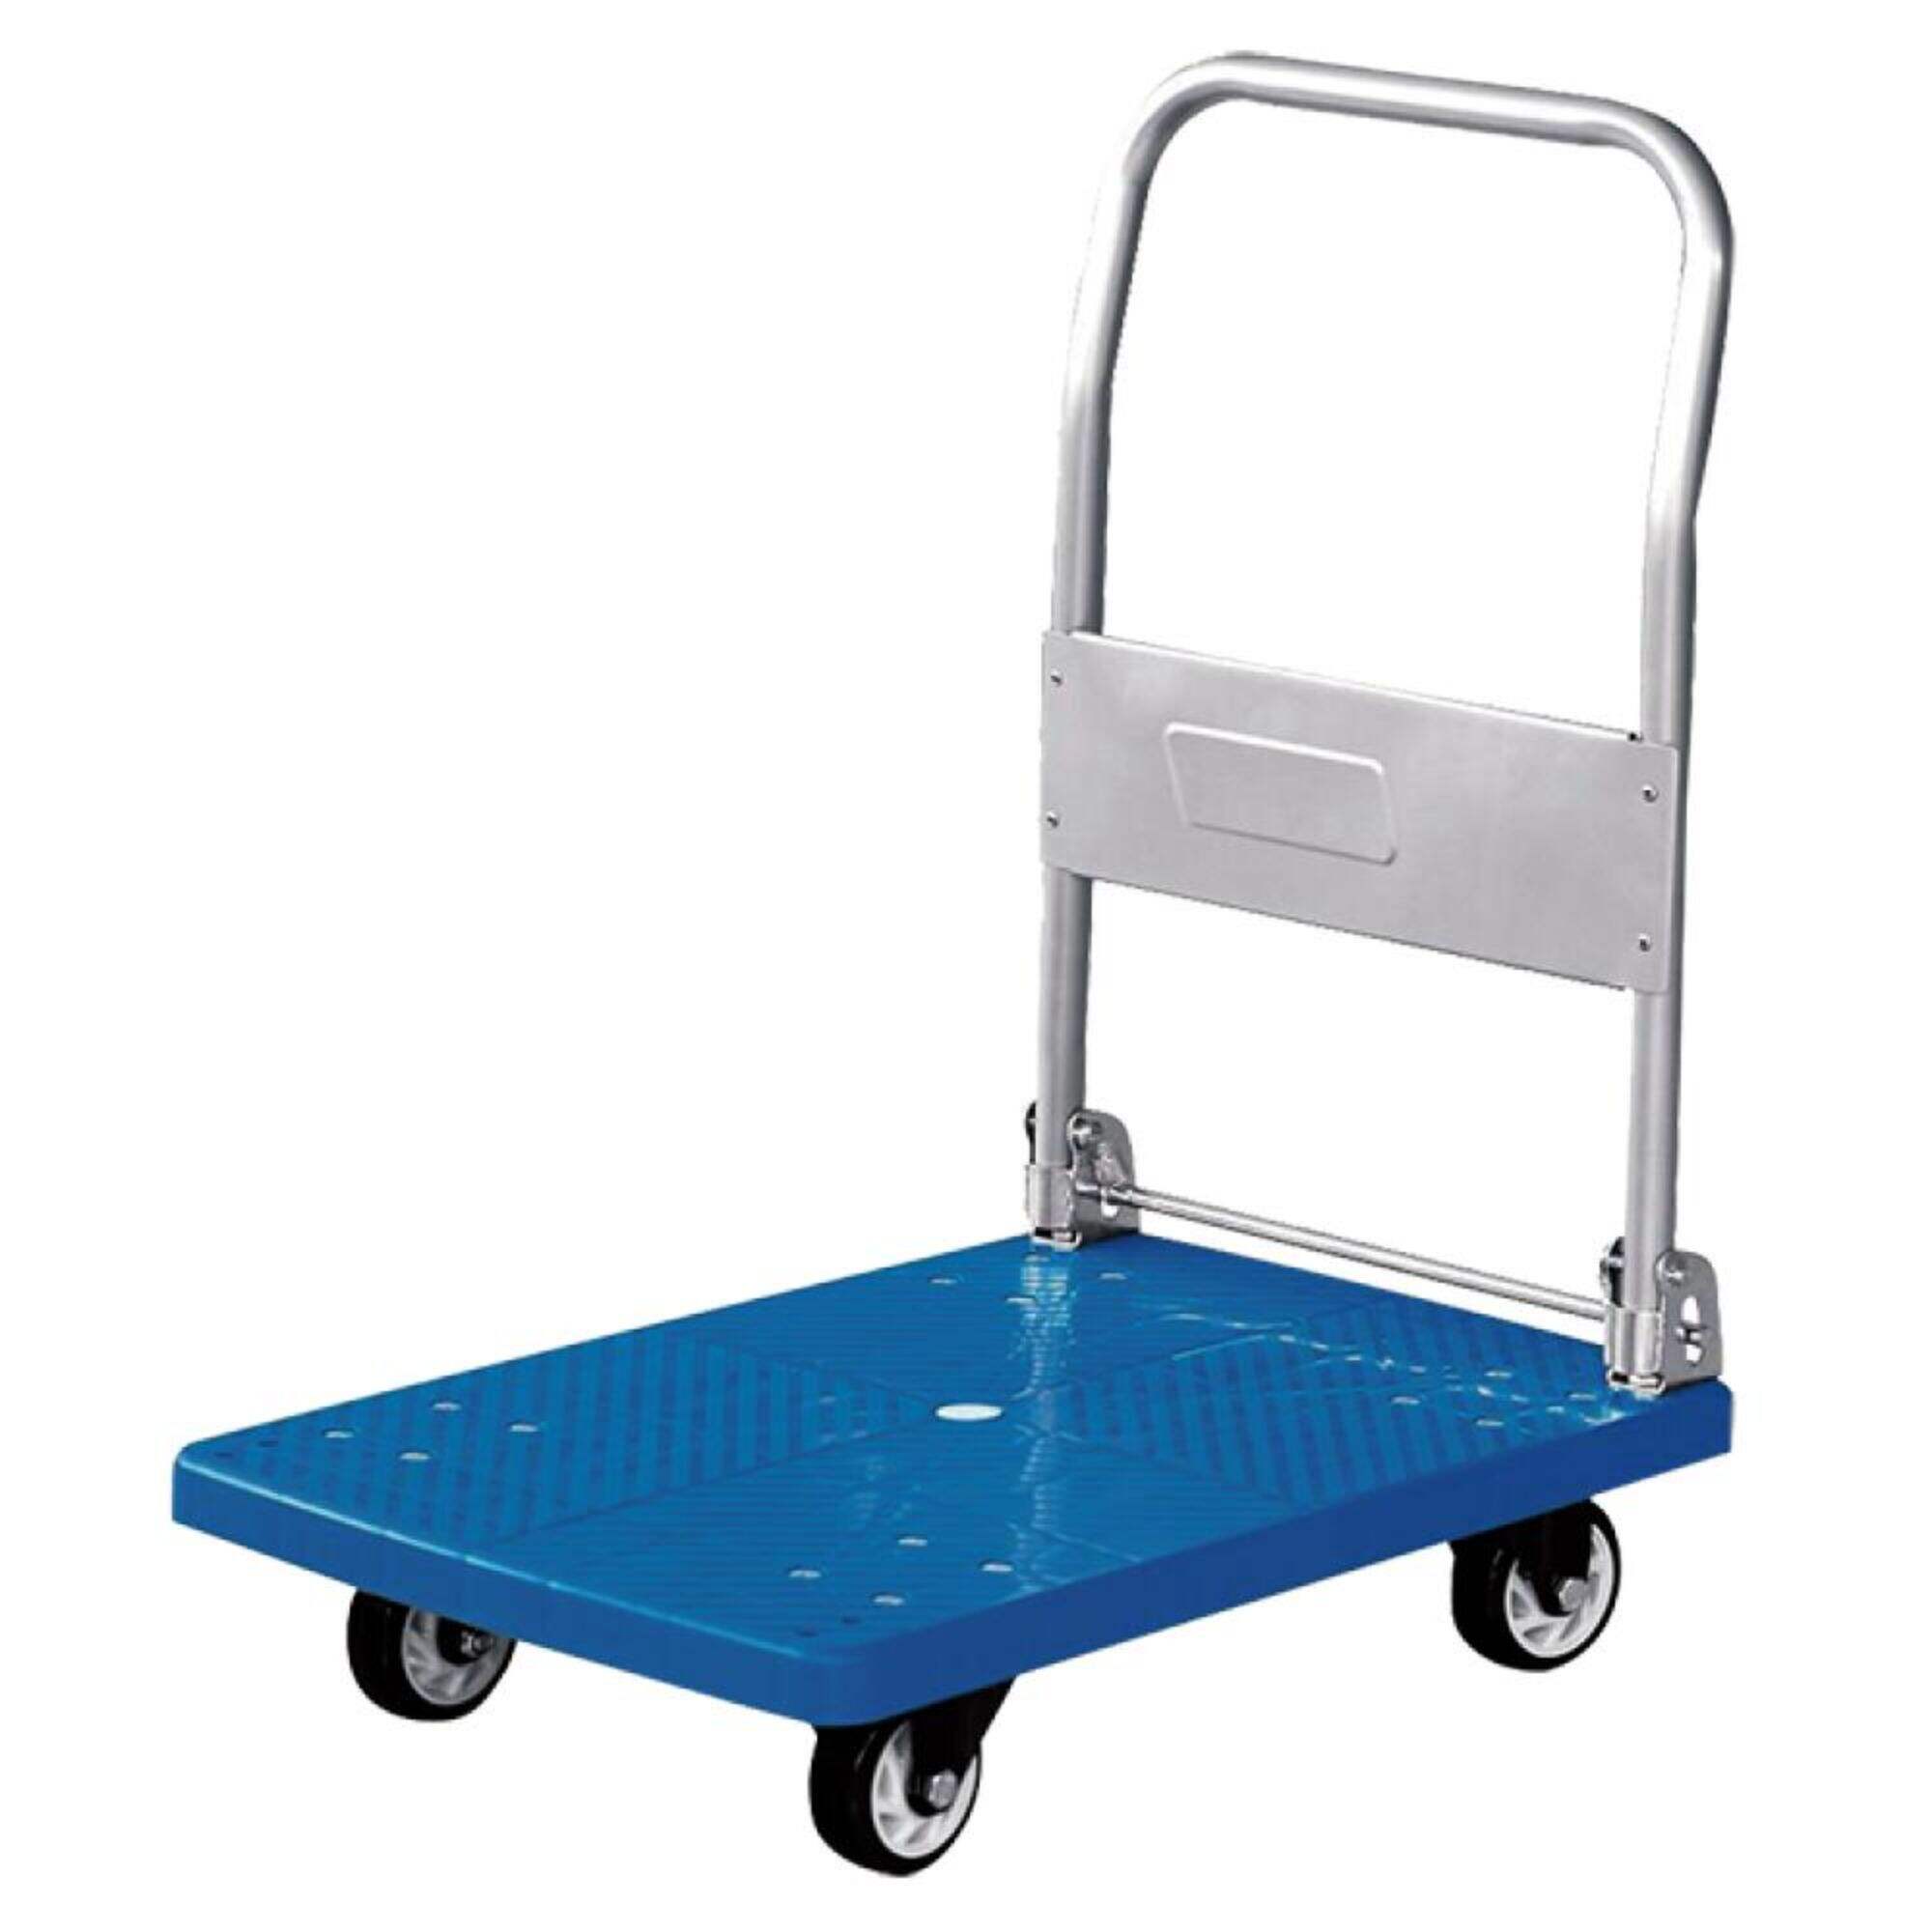 PH150P Platform Hand Truck, Folding Push Hand Dolly Cart for Loading and Storage, with 4